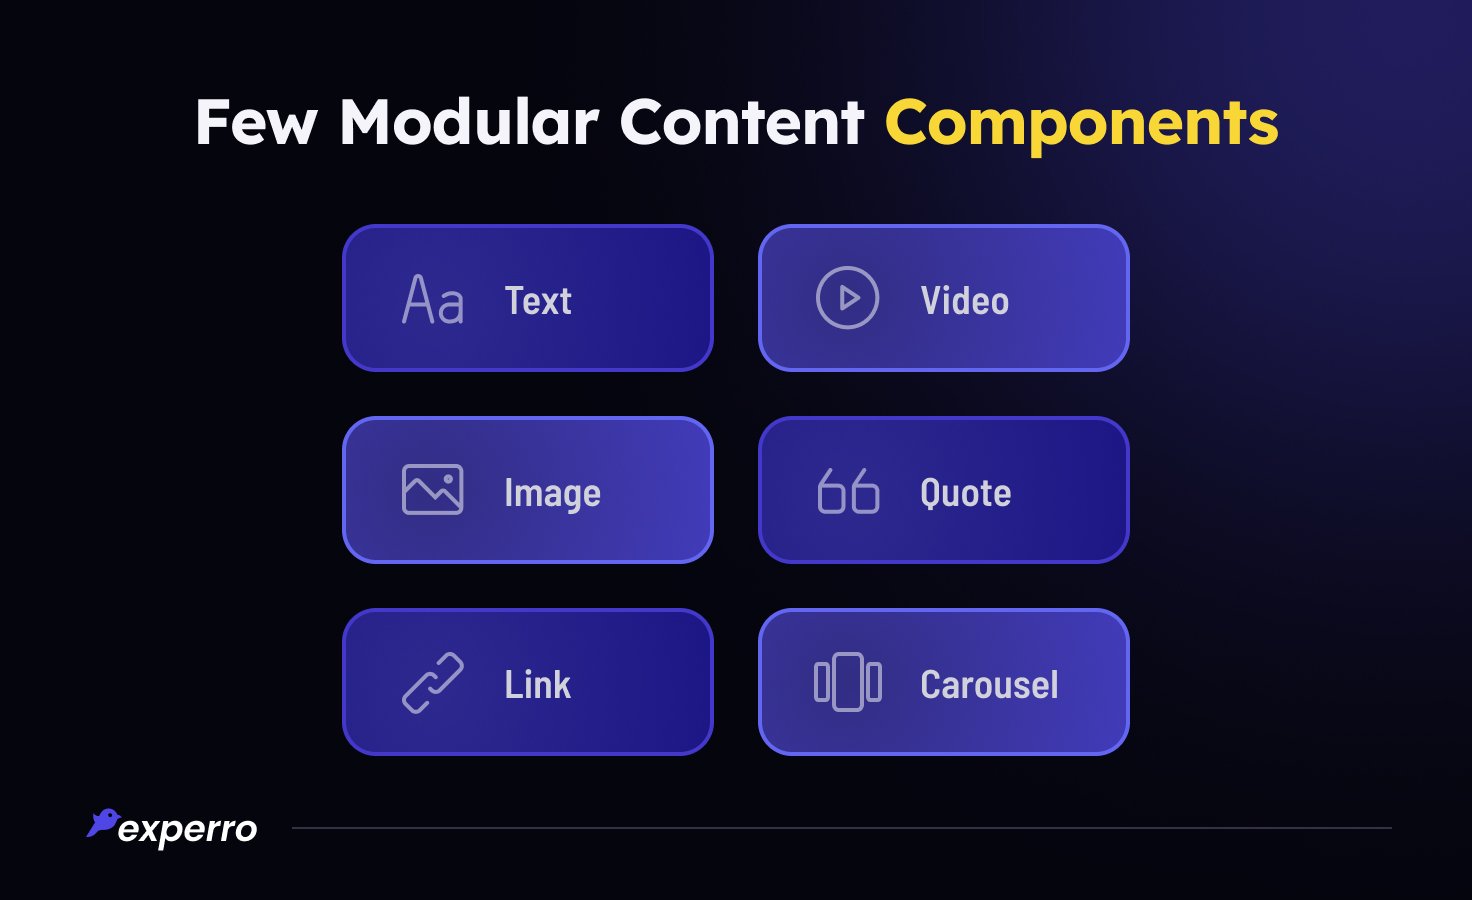 Components of Modular Content